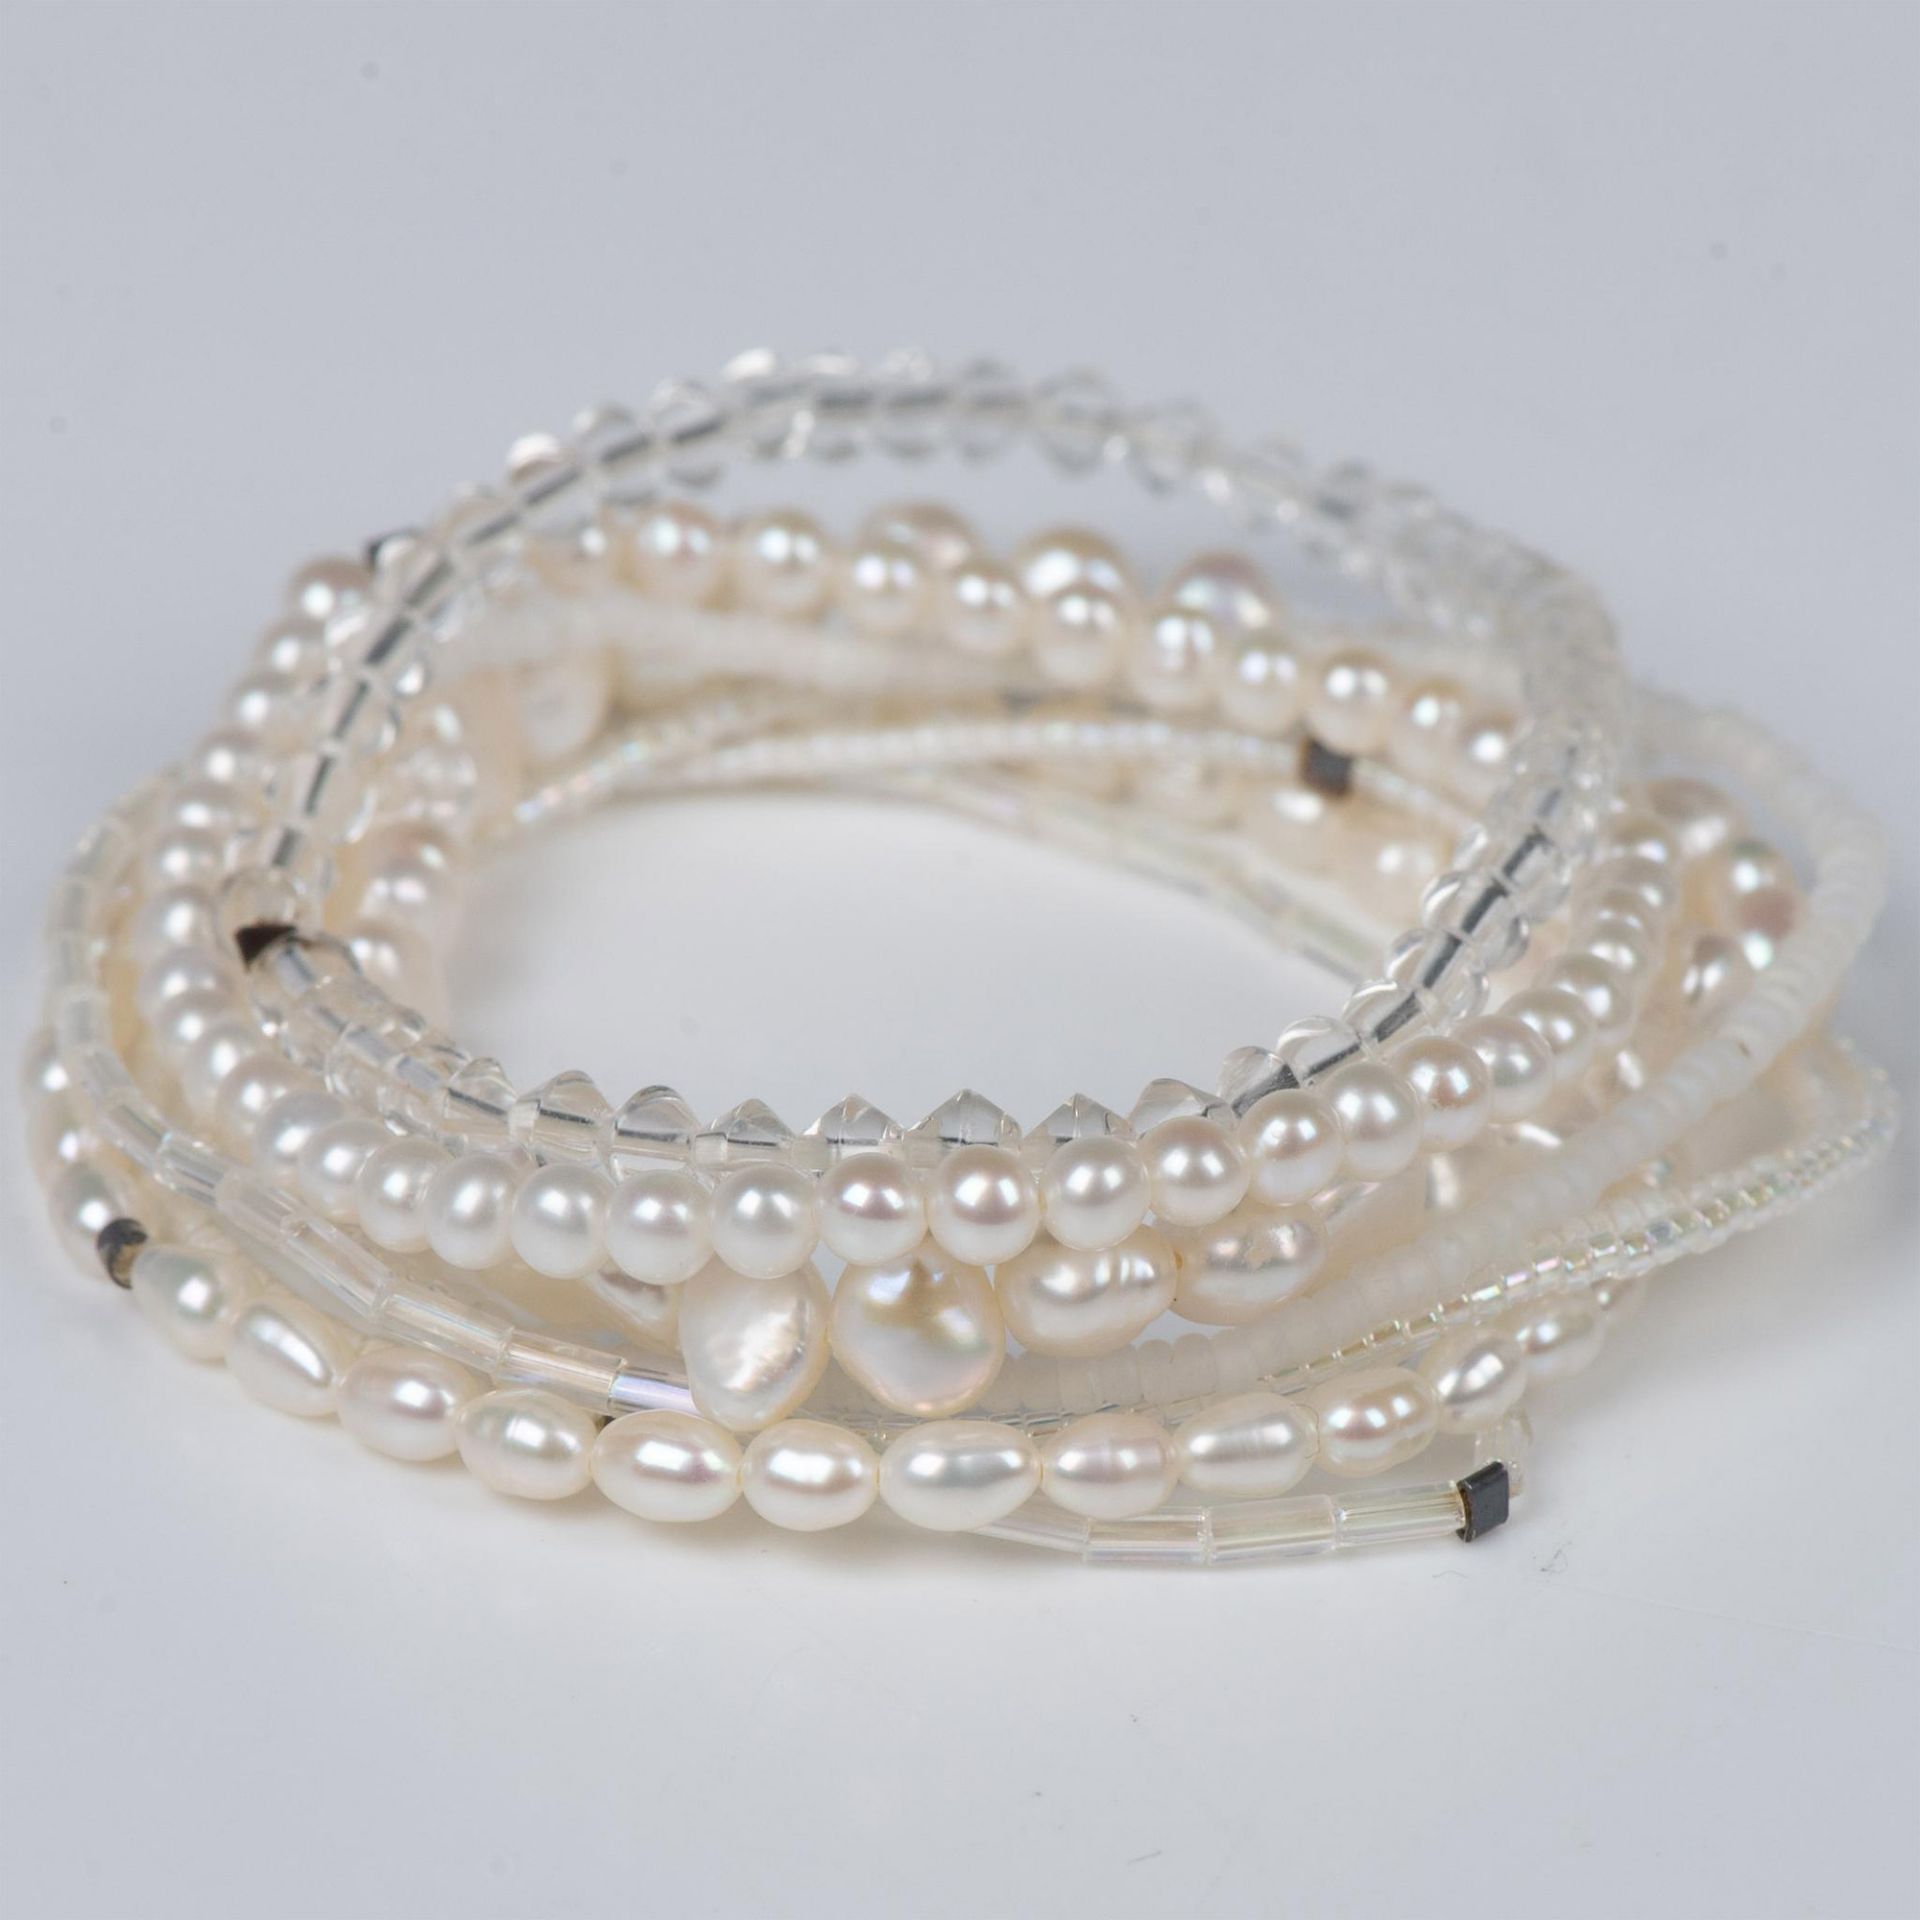 8pc Beautiful Set of White Baroque Pearl and Bead Bracelets - Image 3 of 4